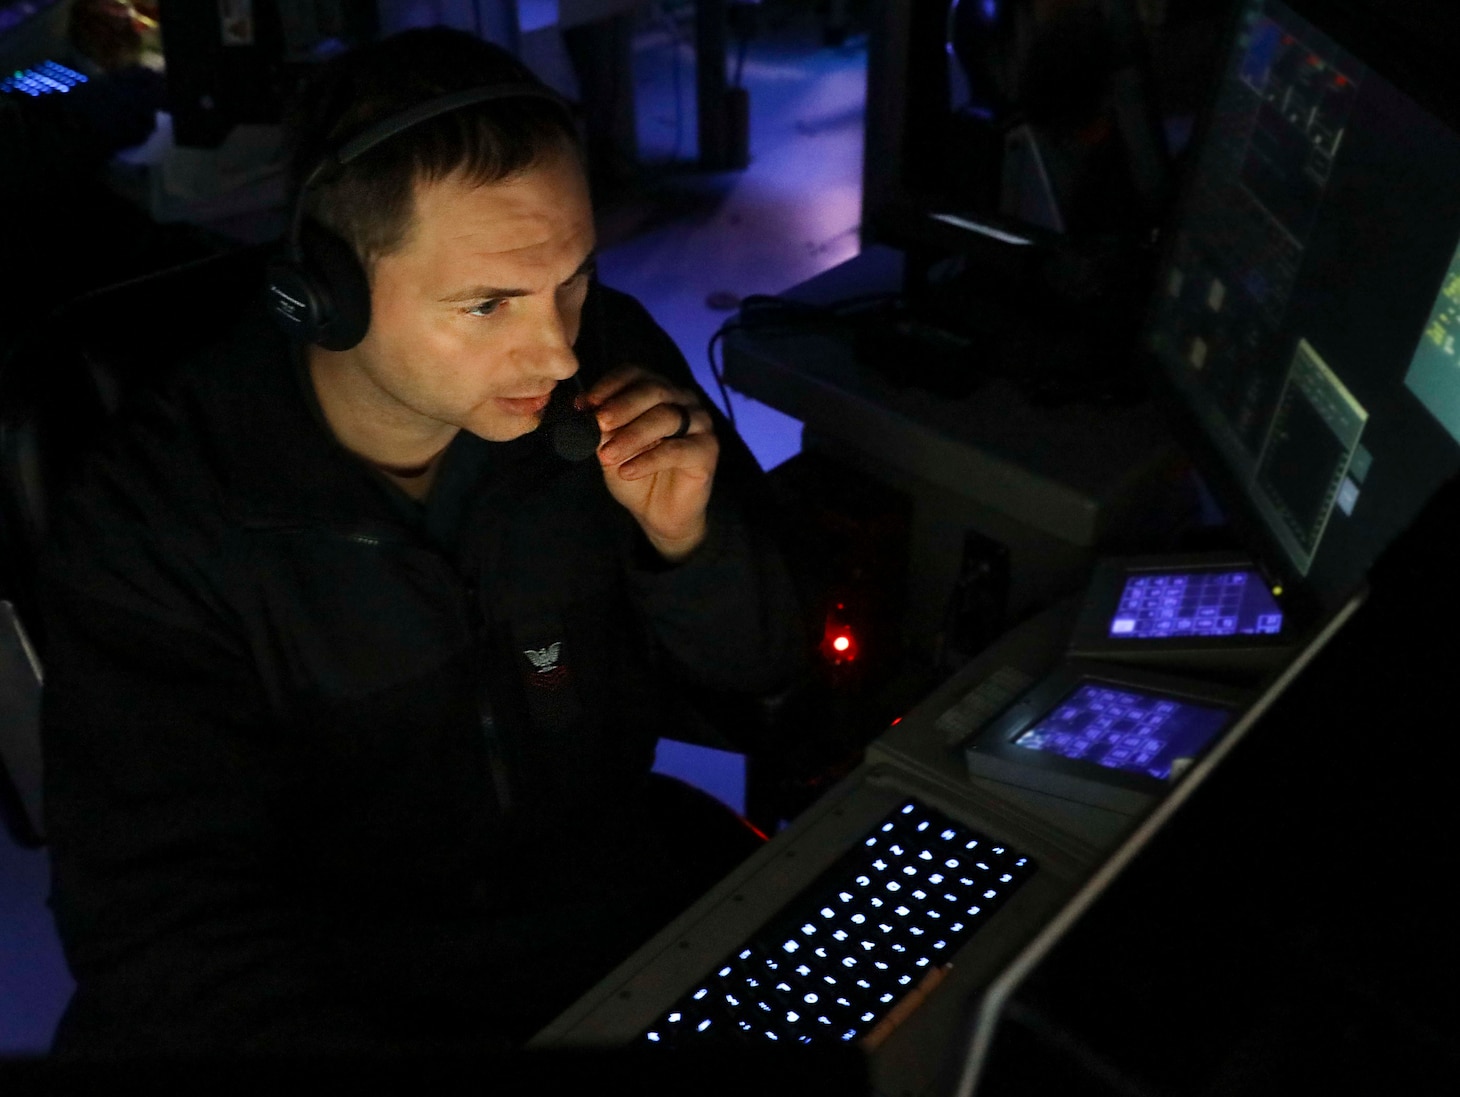 210712-N-FO714-2011 SOUTH CHINA SEA (July 12, 2021) Operations Specialist 1st Class Justin Brown, from Albany, N.Y., monitors the surface and air picture from inside the combat information center aboard Arleigh Burke-class guided-missile destroyer USS Benfold (DDG 65) while conducting routine underway operations. Benfold is forward-deployed to the U.S. 7th Fleet area of operations in support of a free and open Indo-Pacific. (U.S. Navy photo by Mass Communication Specialist 1st Class Deanna C. Gonzales)